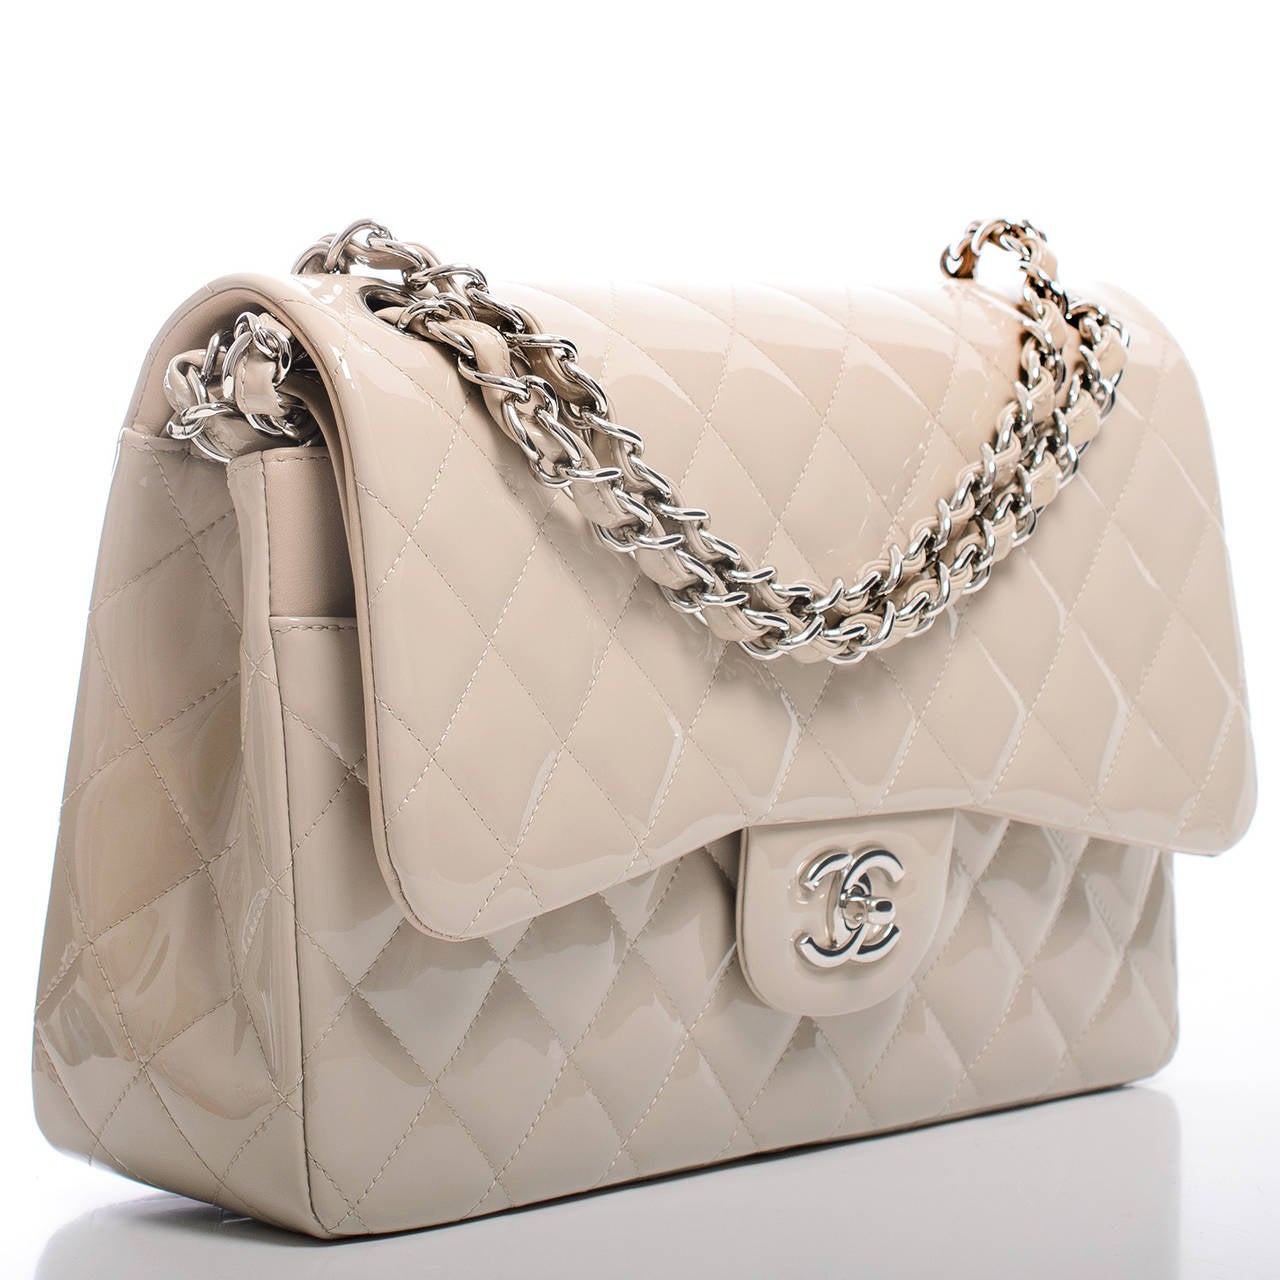 Chanel Light Beige Quilted Patent Jumbo Classic Double Flap Bag at 1stdibs